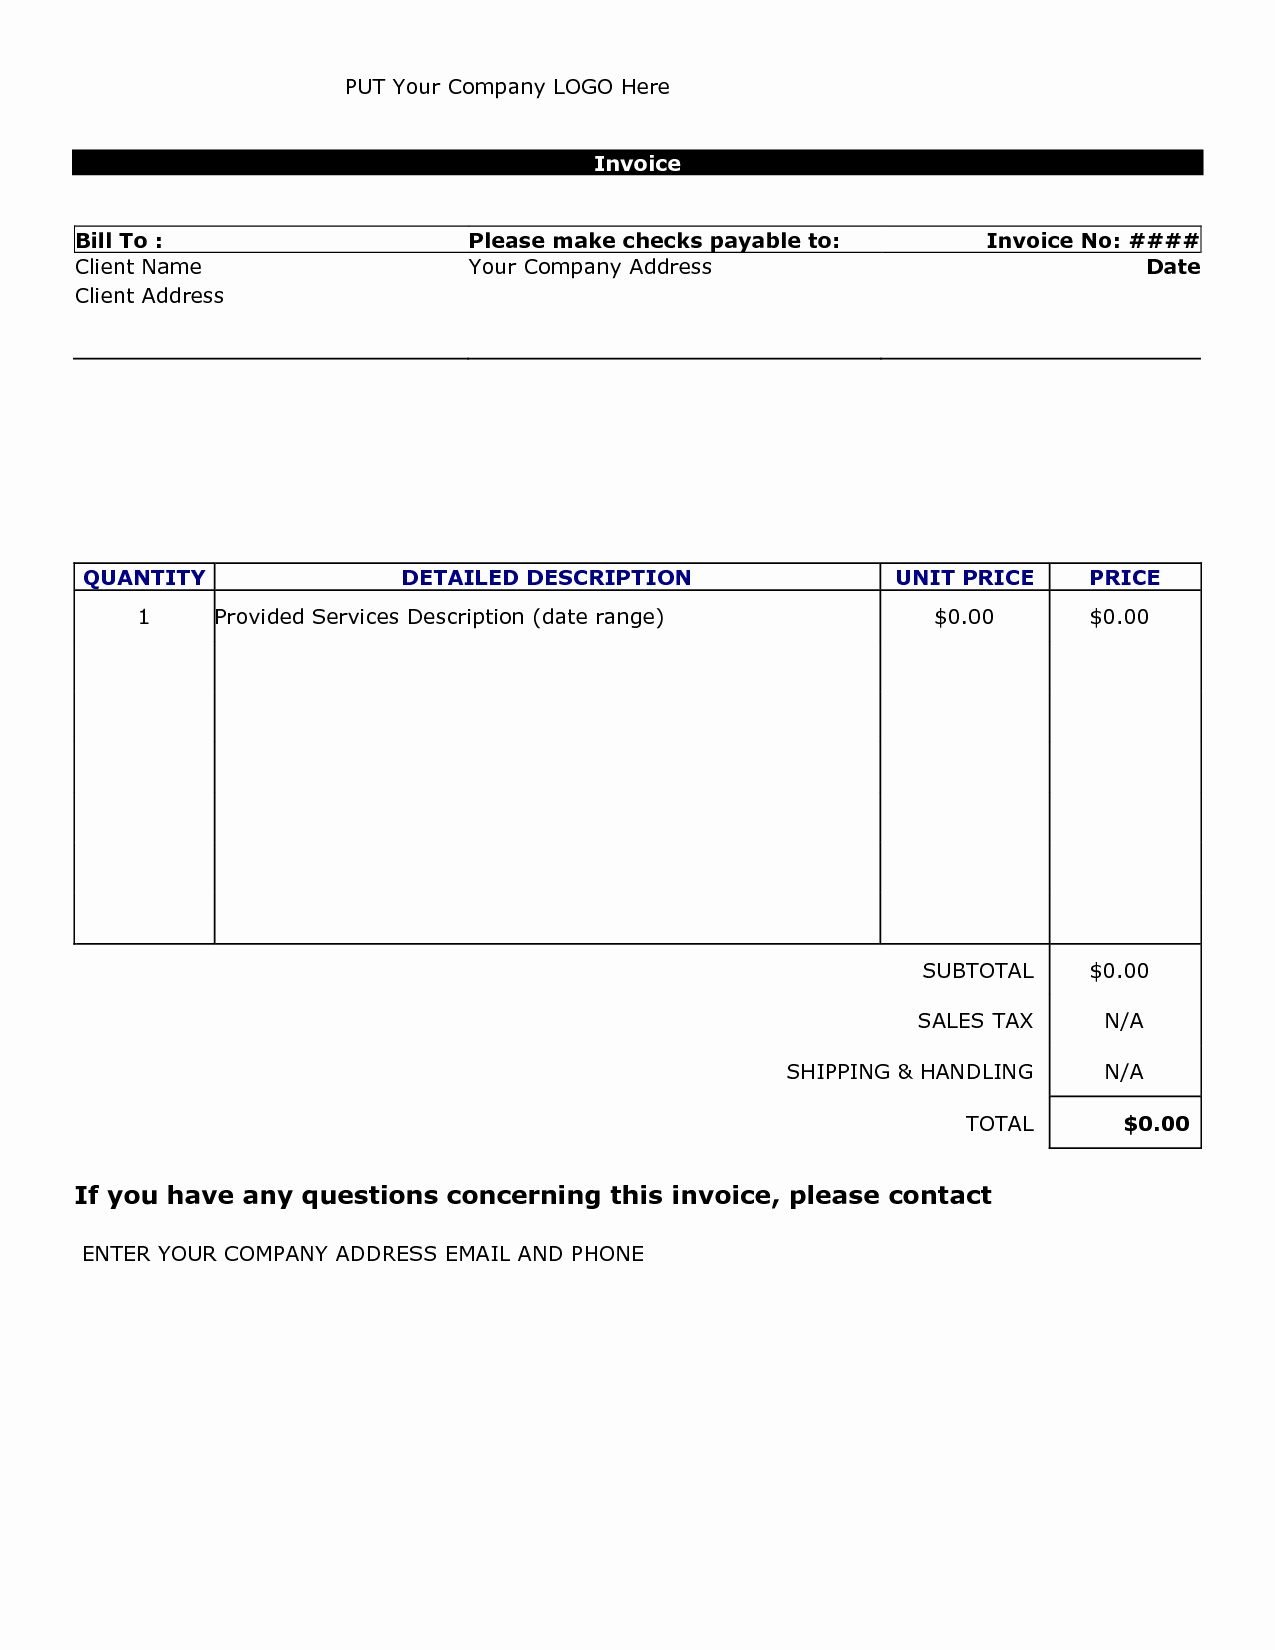 Microsoft Bill Of Sale Template Awesome Invoice Template Word 2010